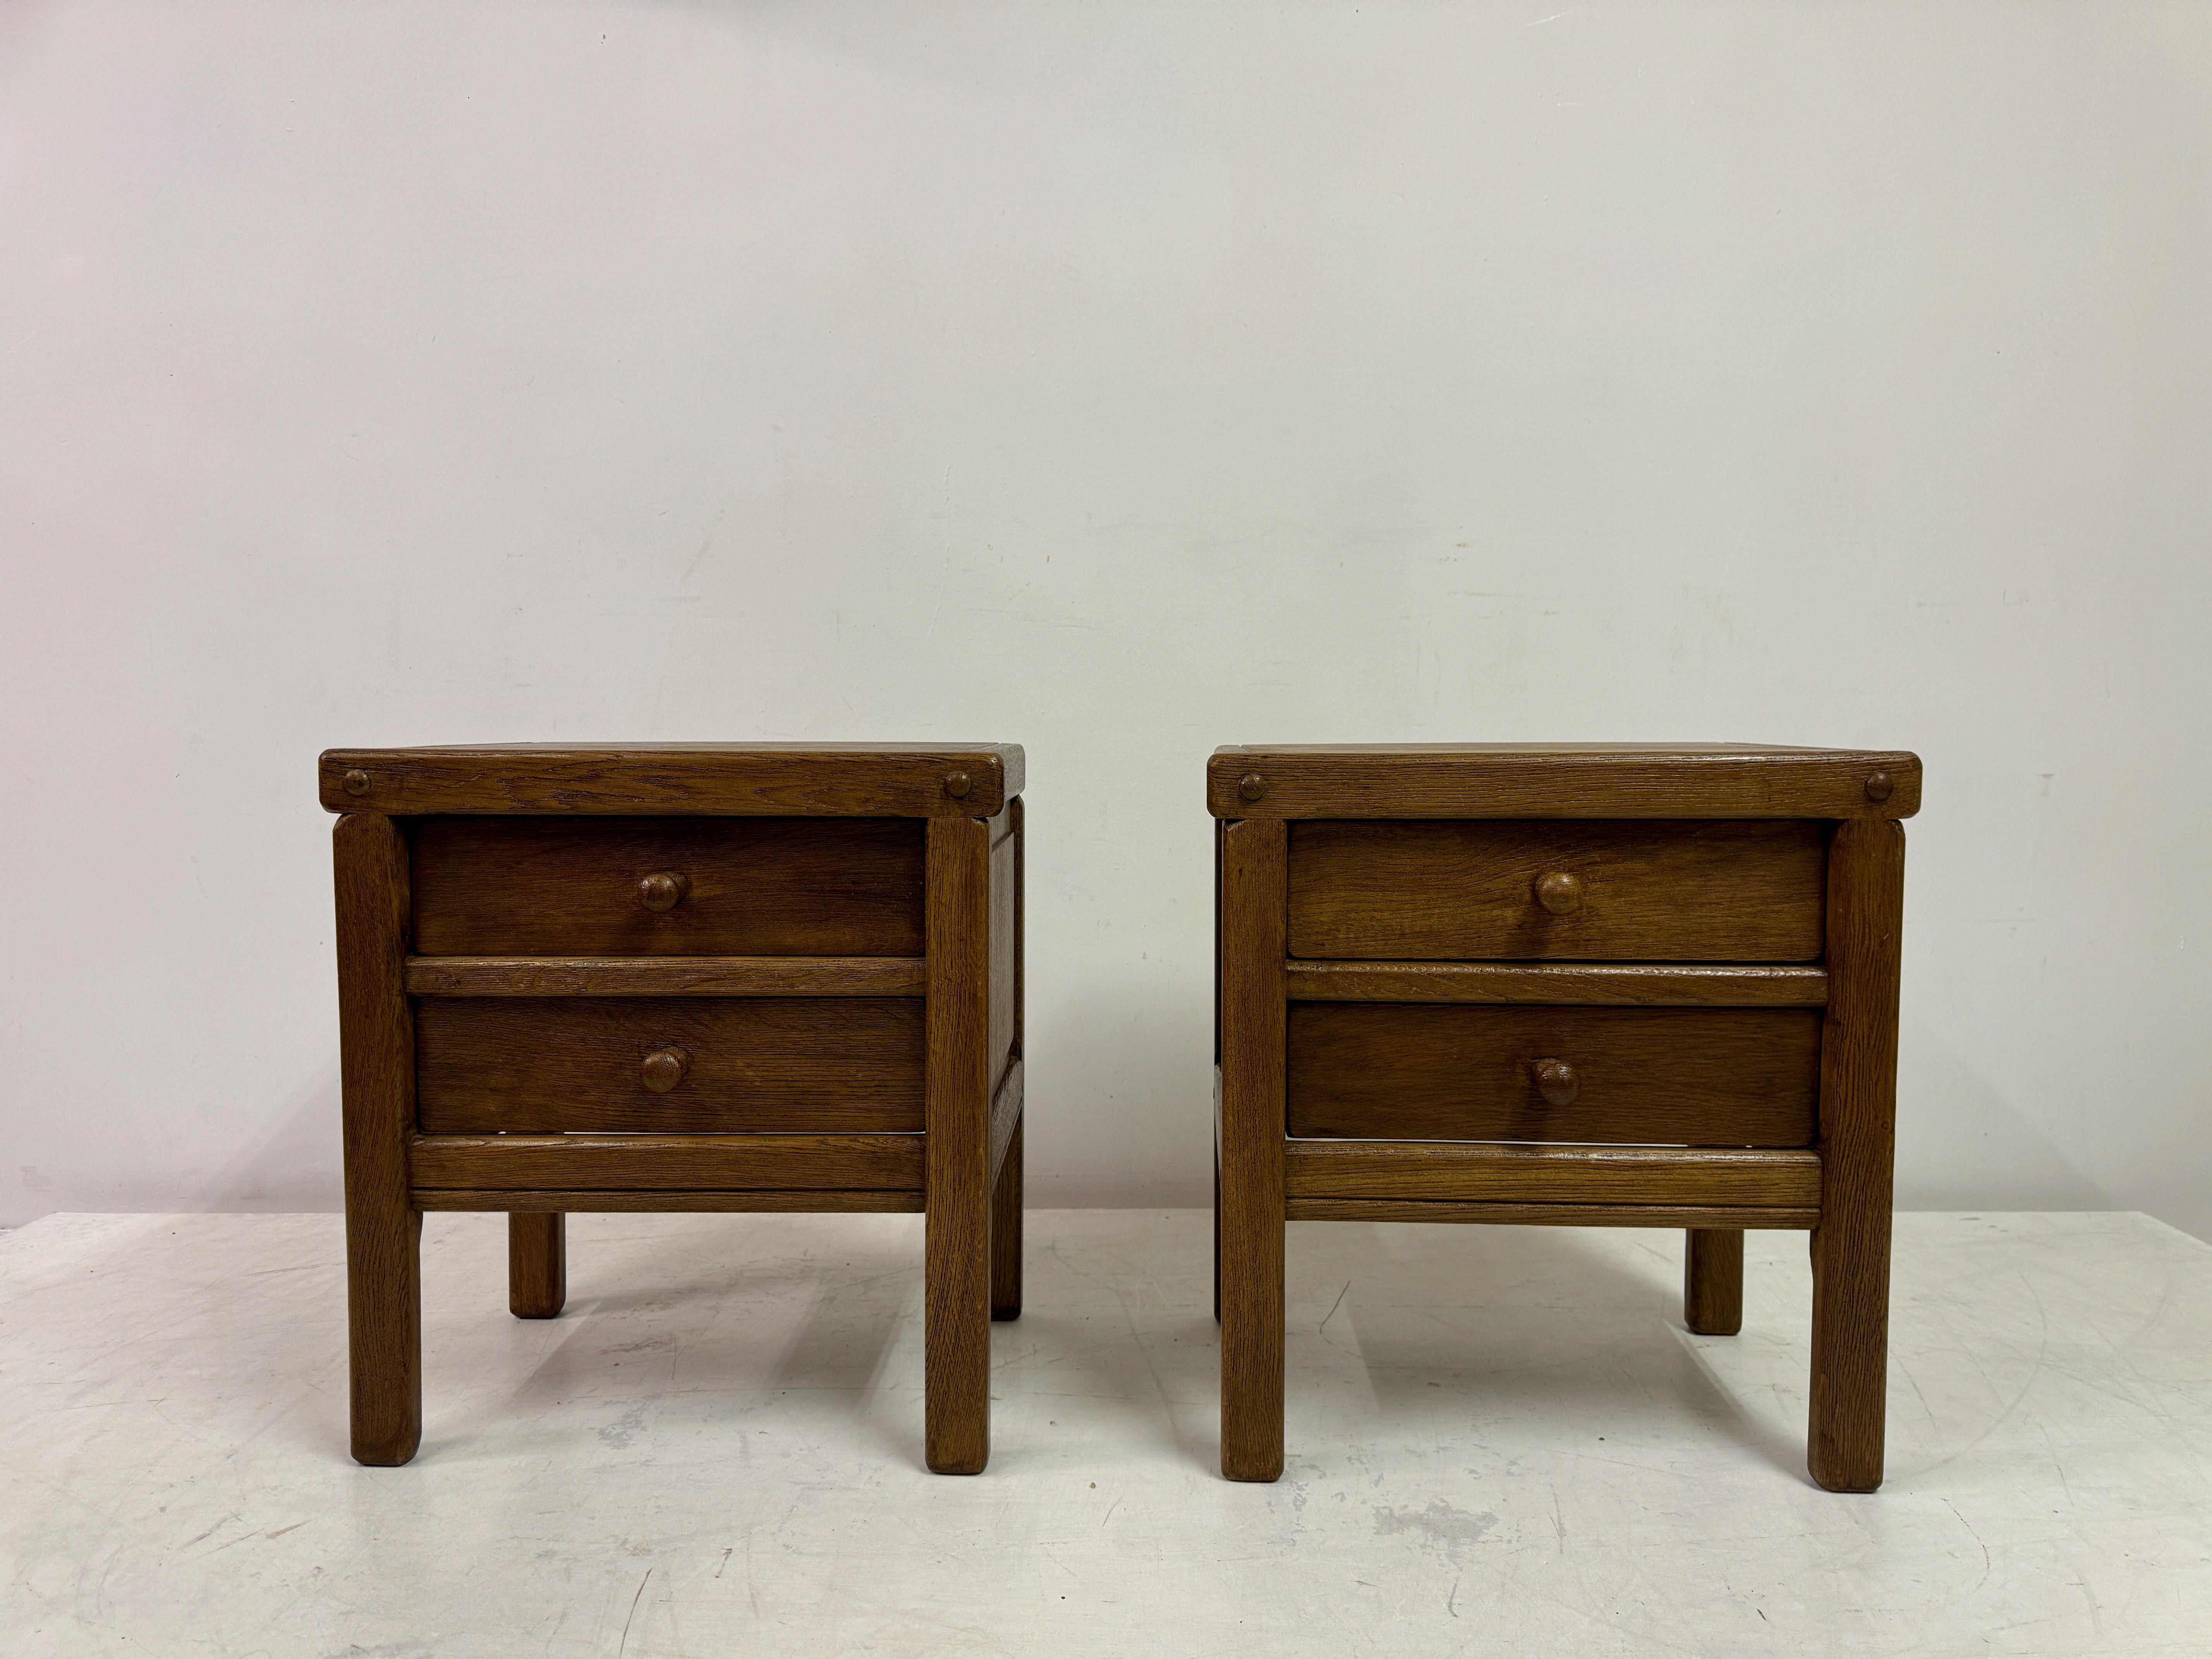 Pair of Brutalist Style Bedside Tables or Nightstands 1